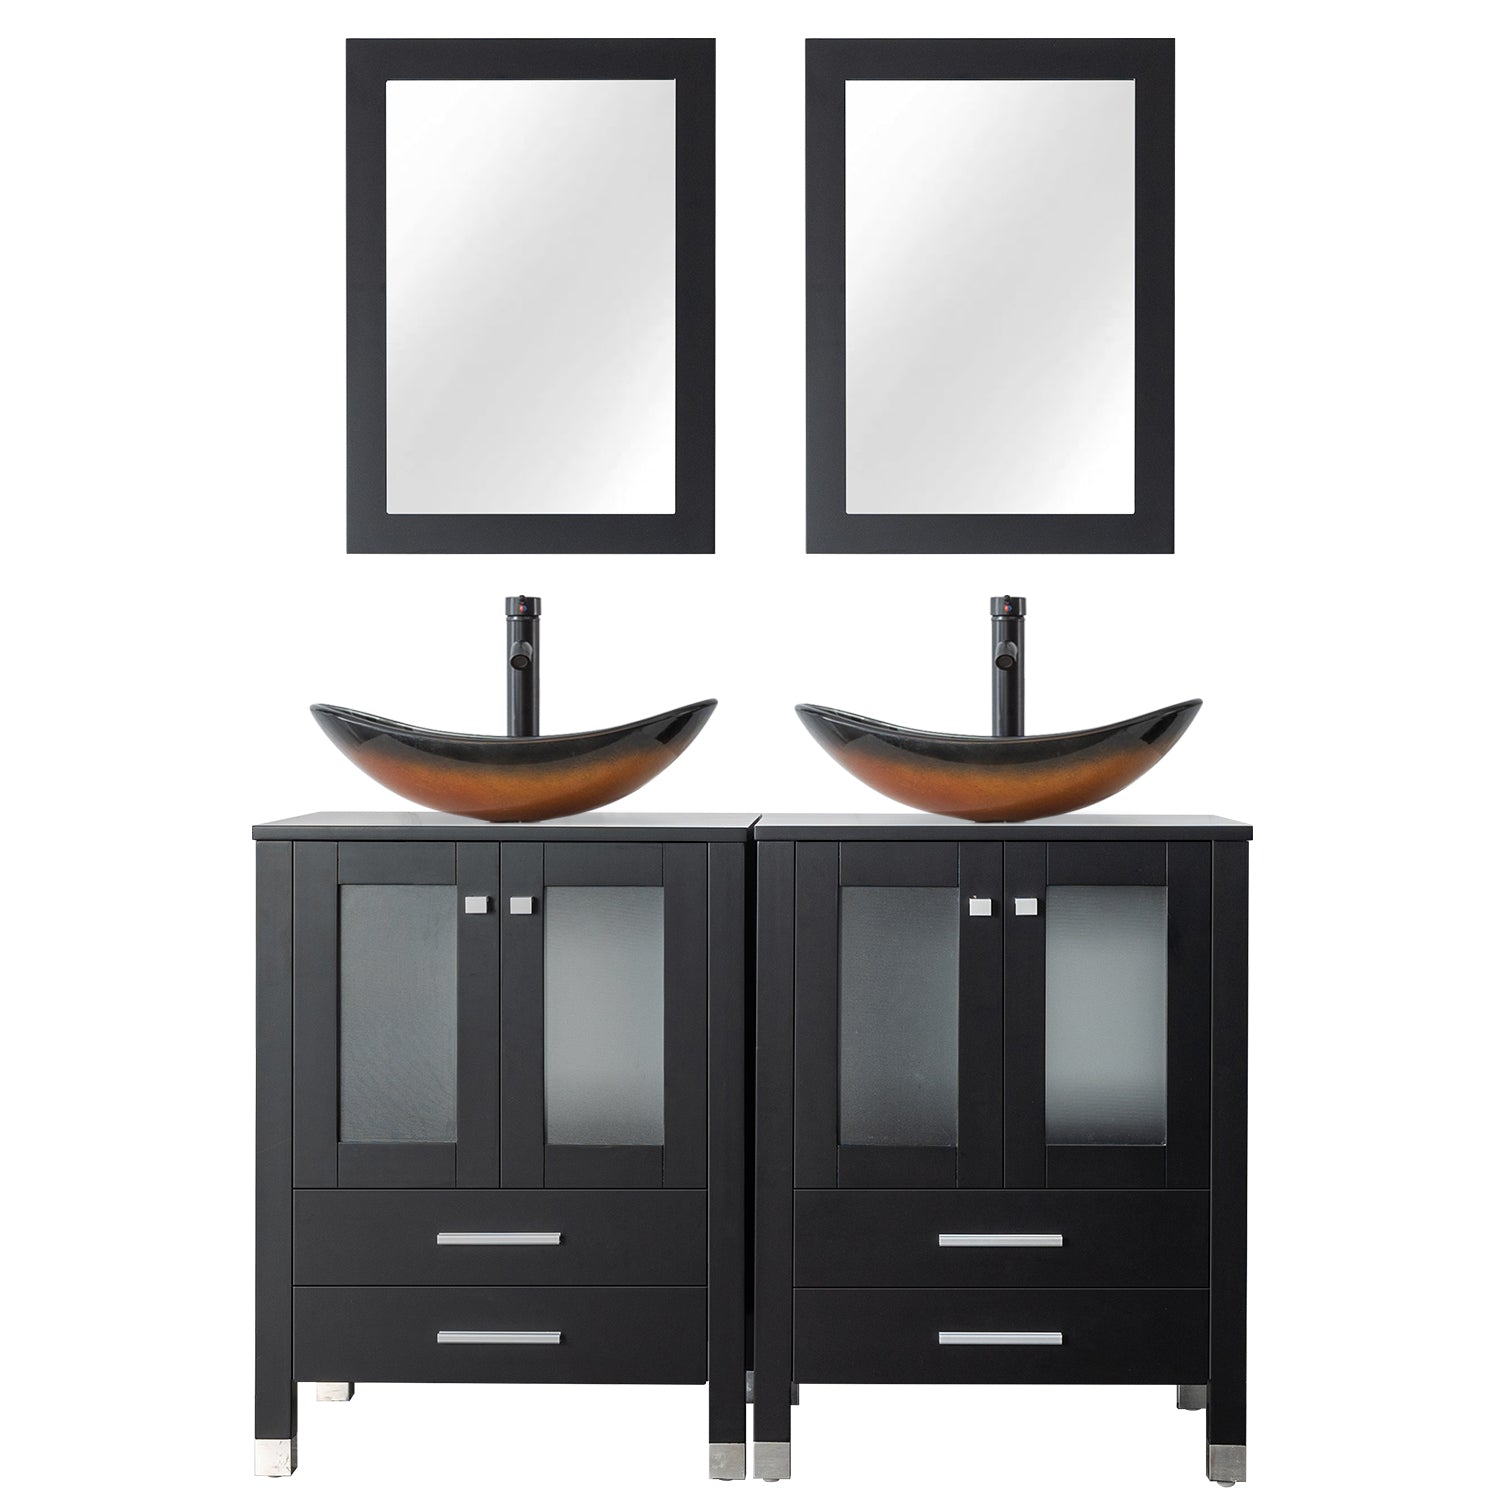 Eclife 48" Double Bathroom Vanity Sink Combos with Solid Wood Construction and Painted Frame - Black